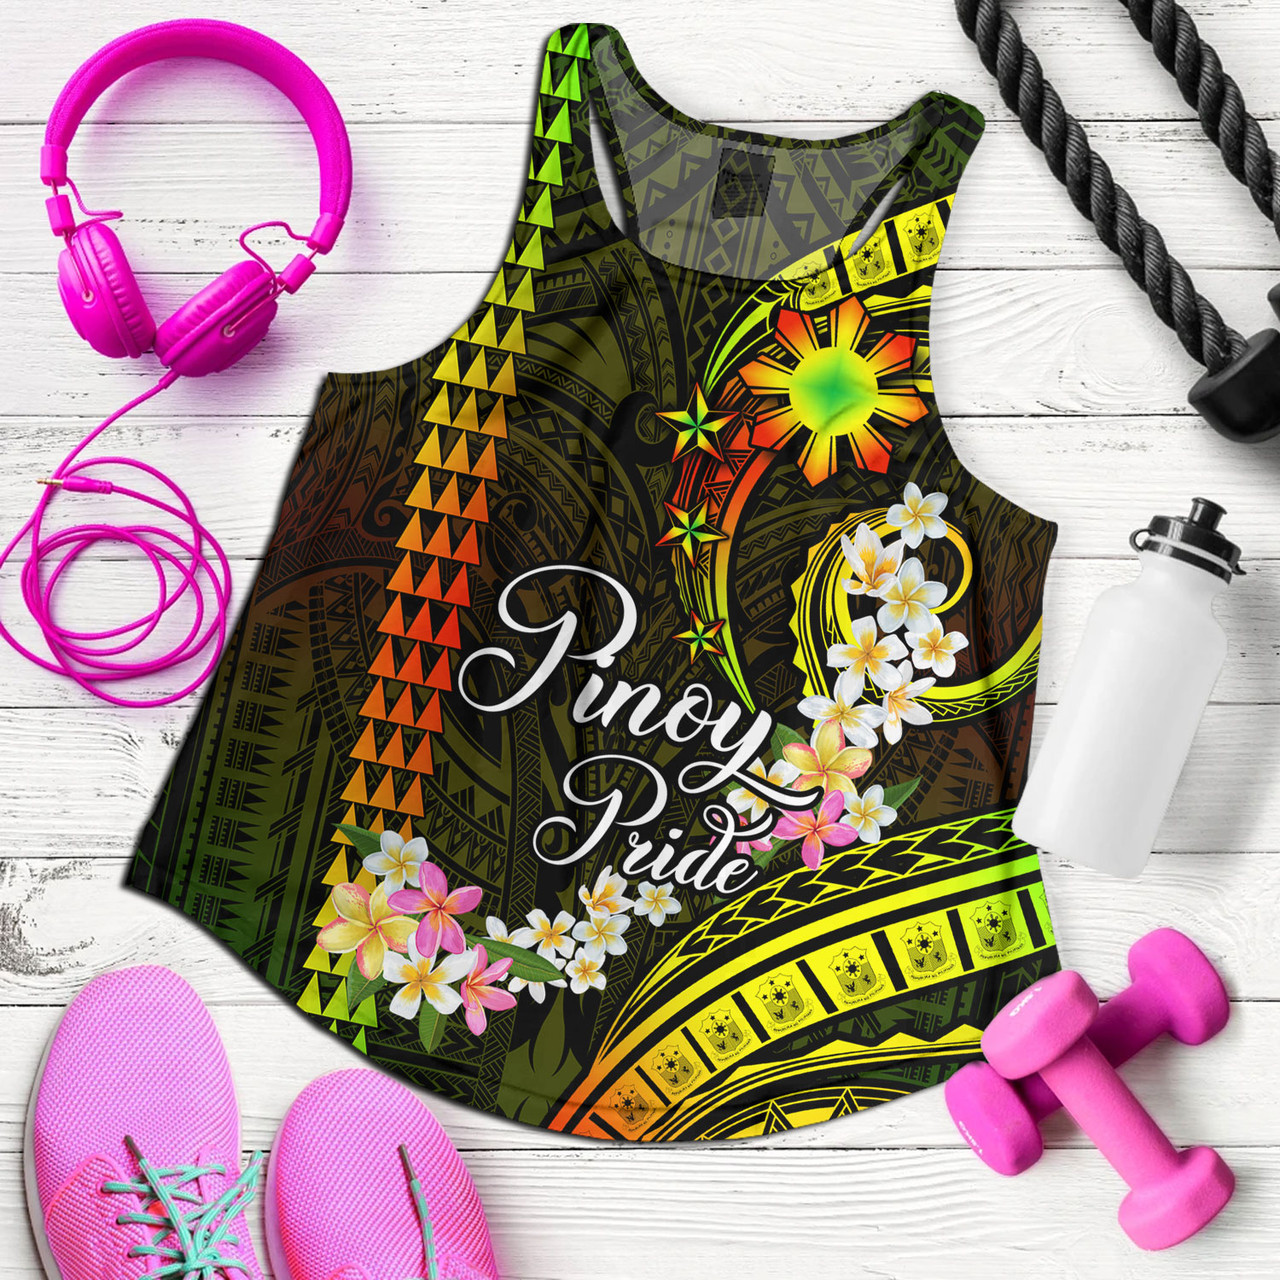 Philippines Filipinos Women Tank Pinoy Pride Tribal Patterns Curve Style